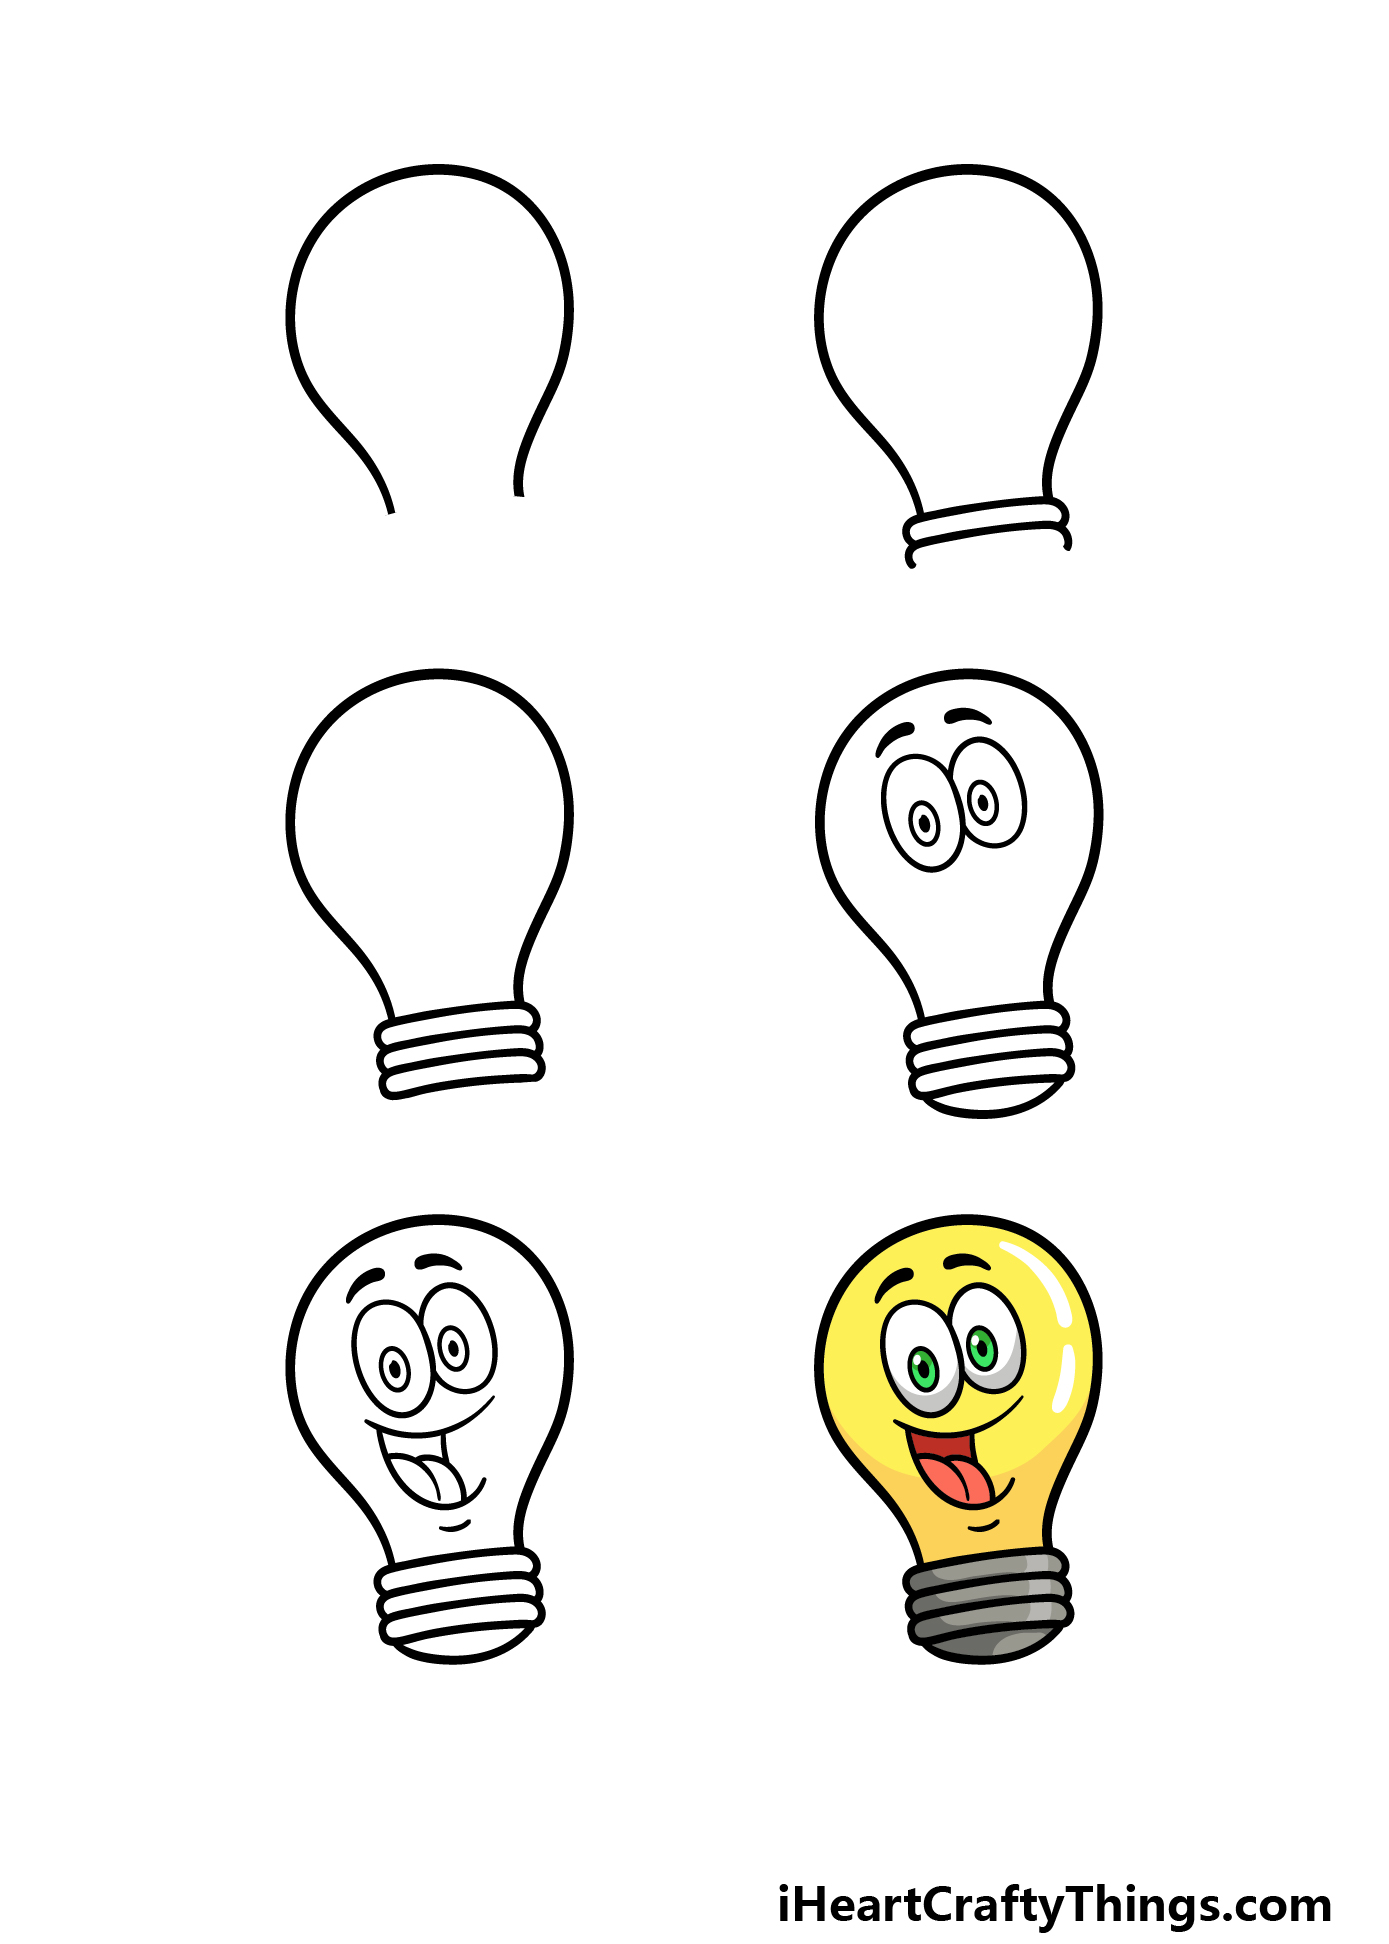 how to draw a cartoon Light Bulb in 6 steps